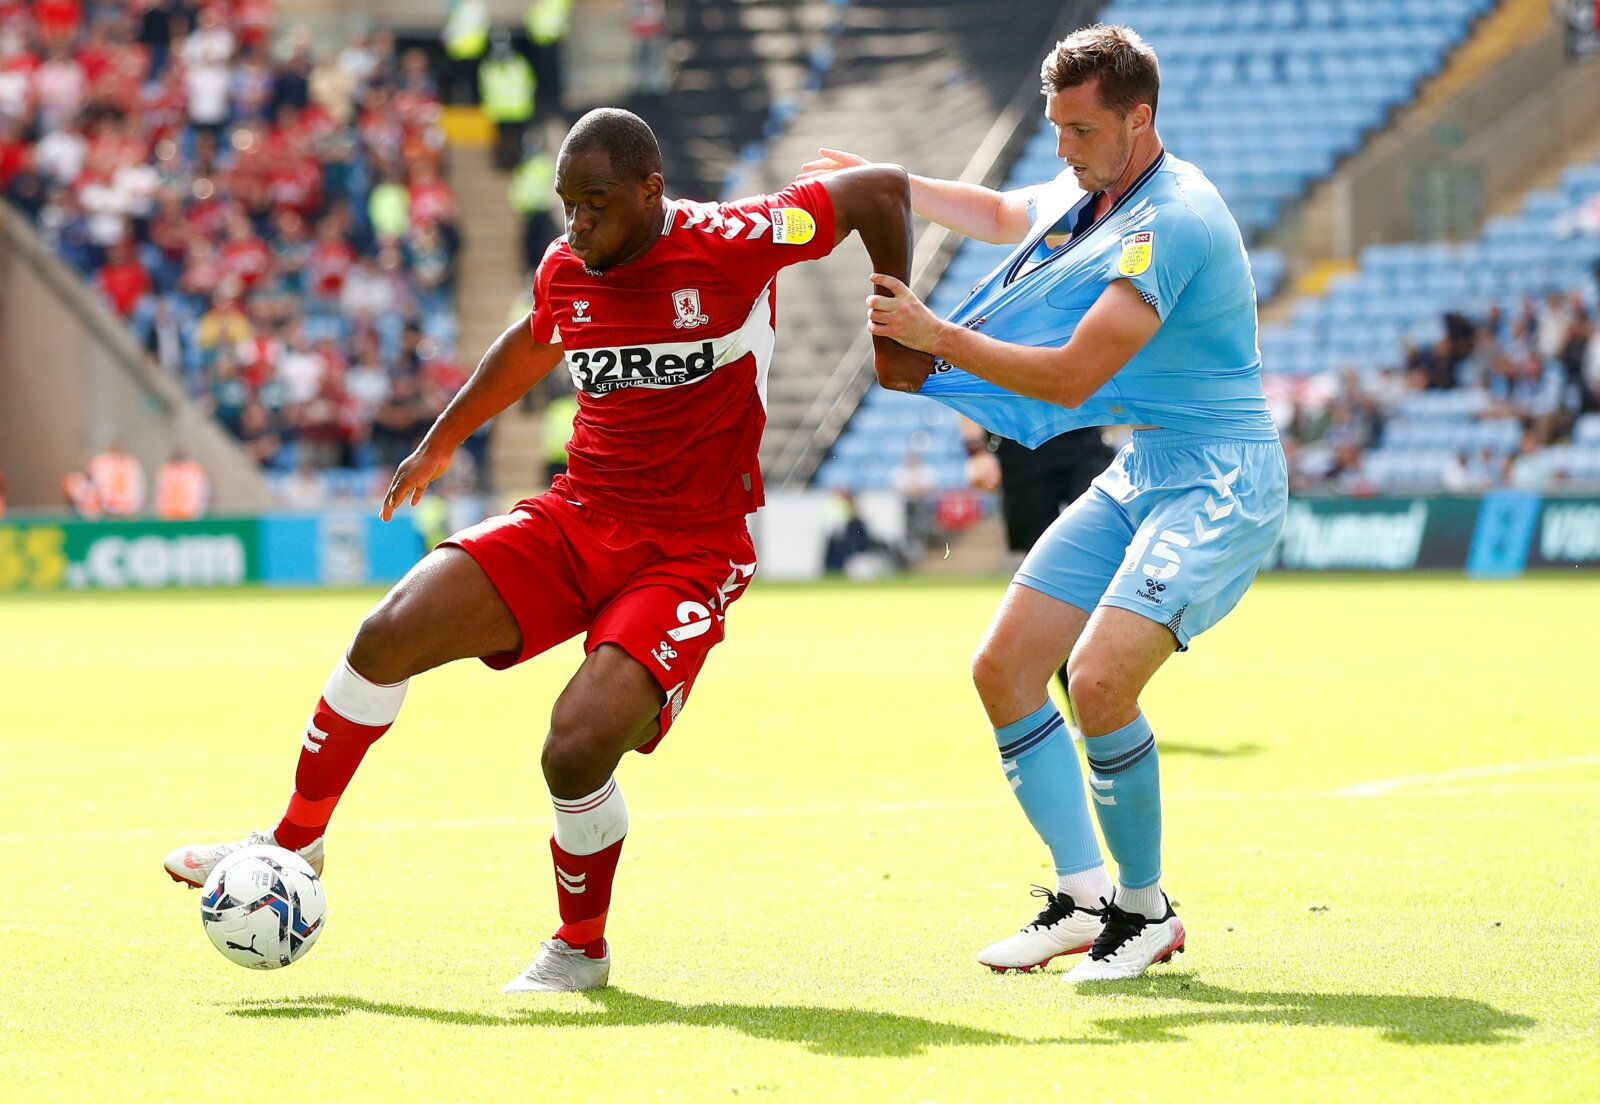 Soccer Football - Championship - Coventry City v Middlesbrough - Coventry Building Society Arena, Coventry, Britain - September 11, 2021  Middlesbrough's Uche Ikpeazu in action with Coventry City's Dominic Hyam   Action Images/Jason Cairnduff  EDITORIAL USE ONLY. No use with unauthorized audio, video, data, fixture lists, club/league logos or 